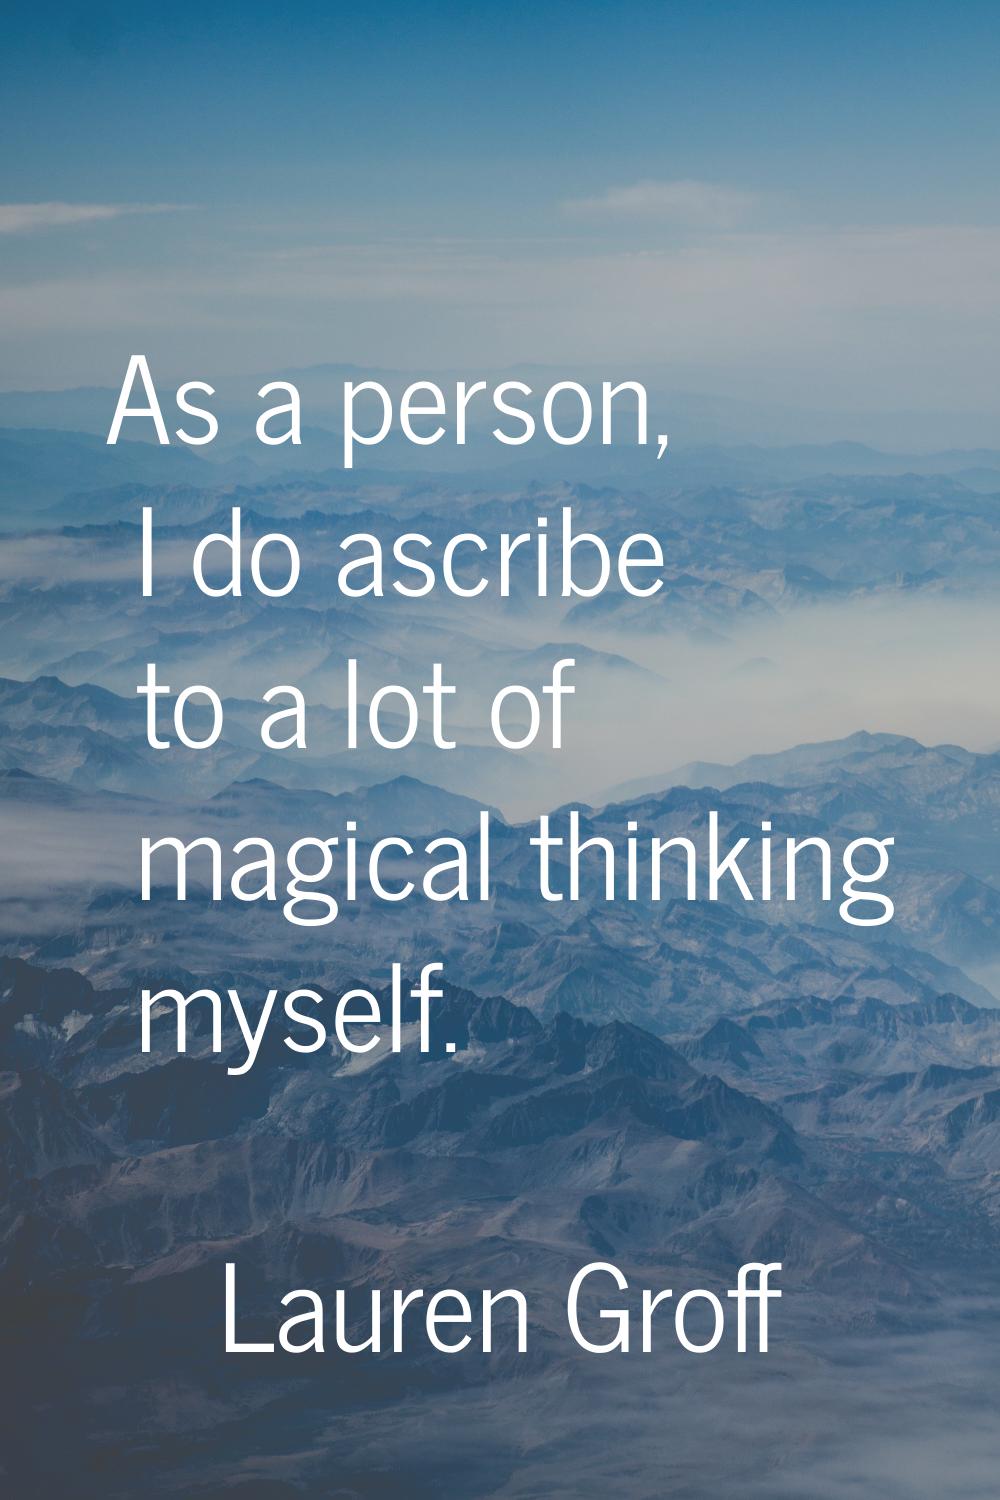 As a person, I do ascribe to a lot of magical thinking myself.